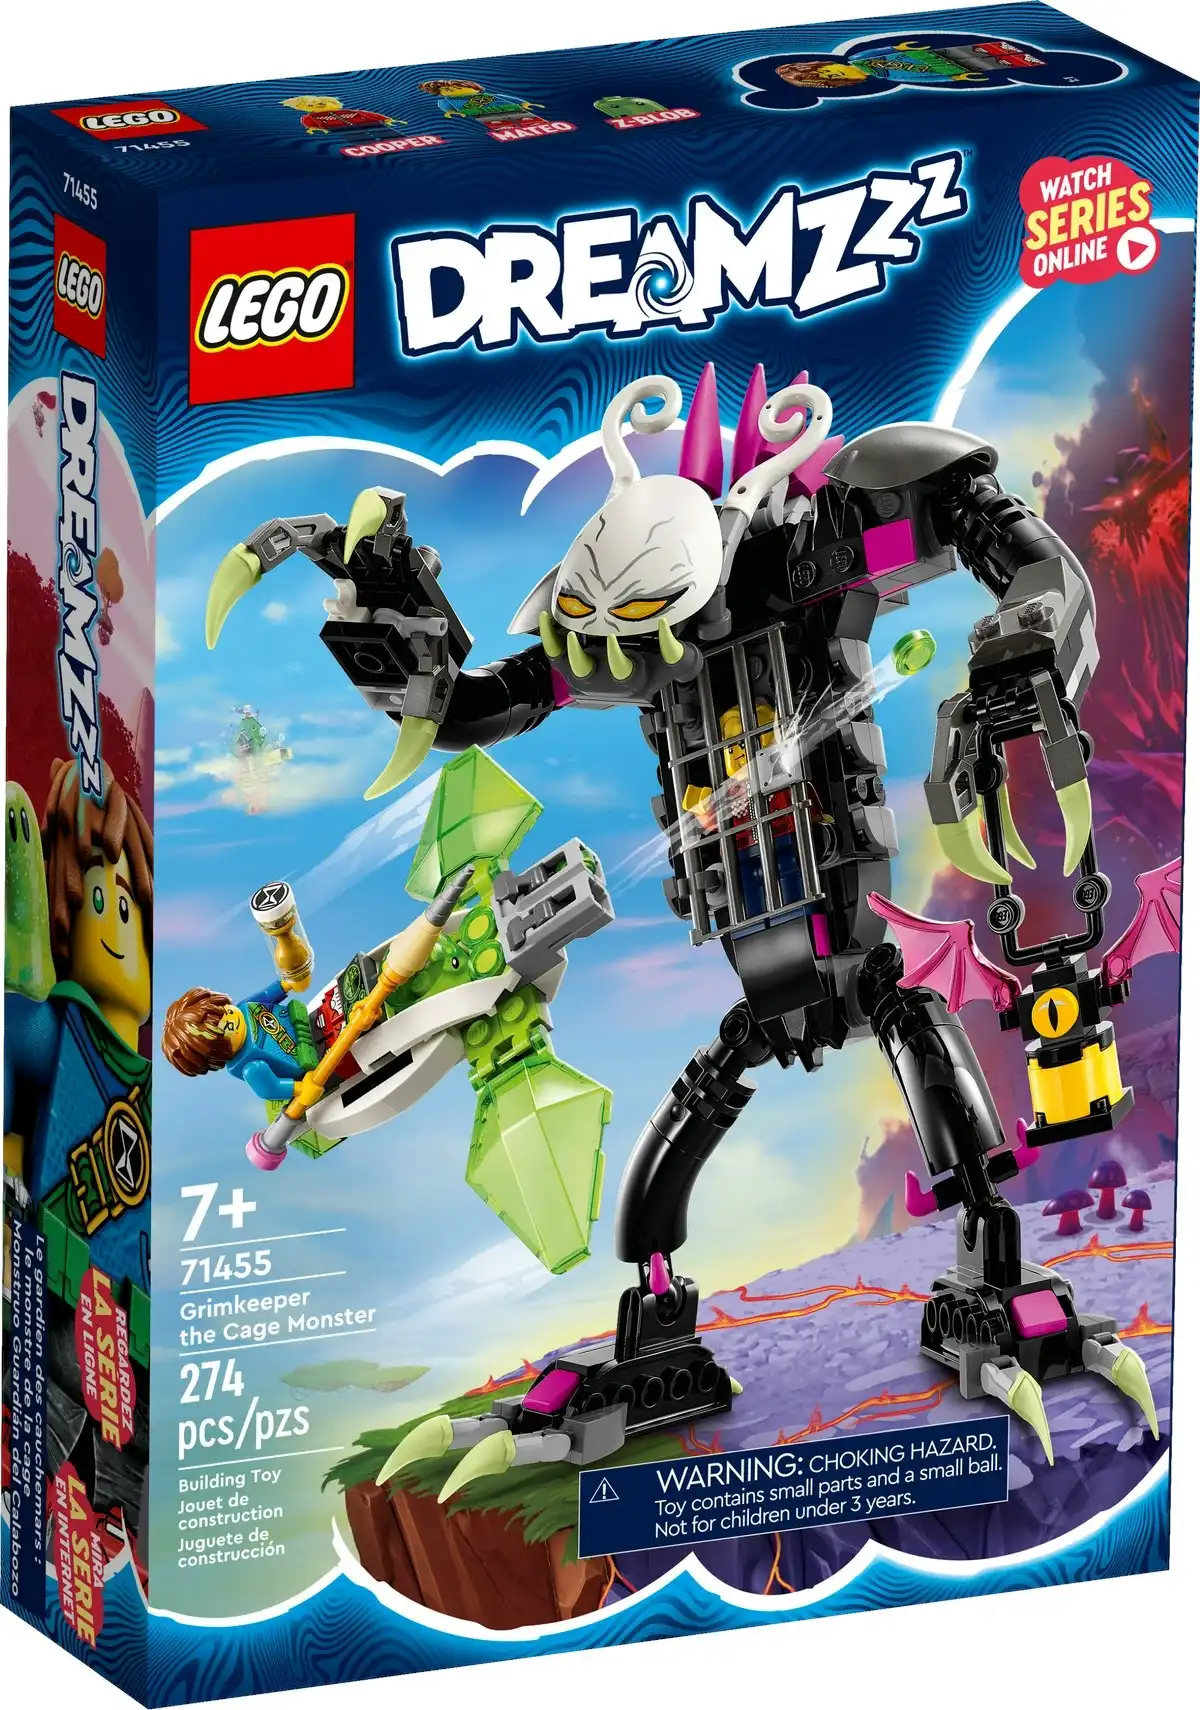 LEGO 71455 Grimkeeper the Cage Monster - DreamZzz